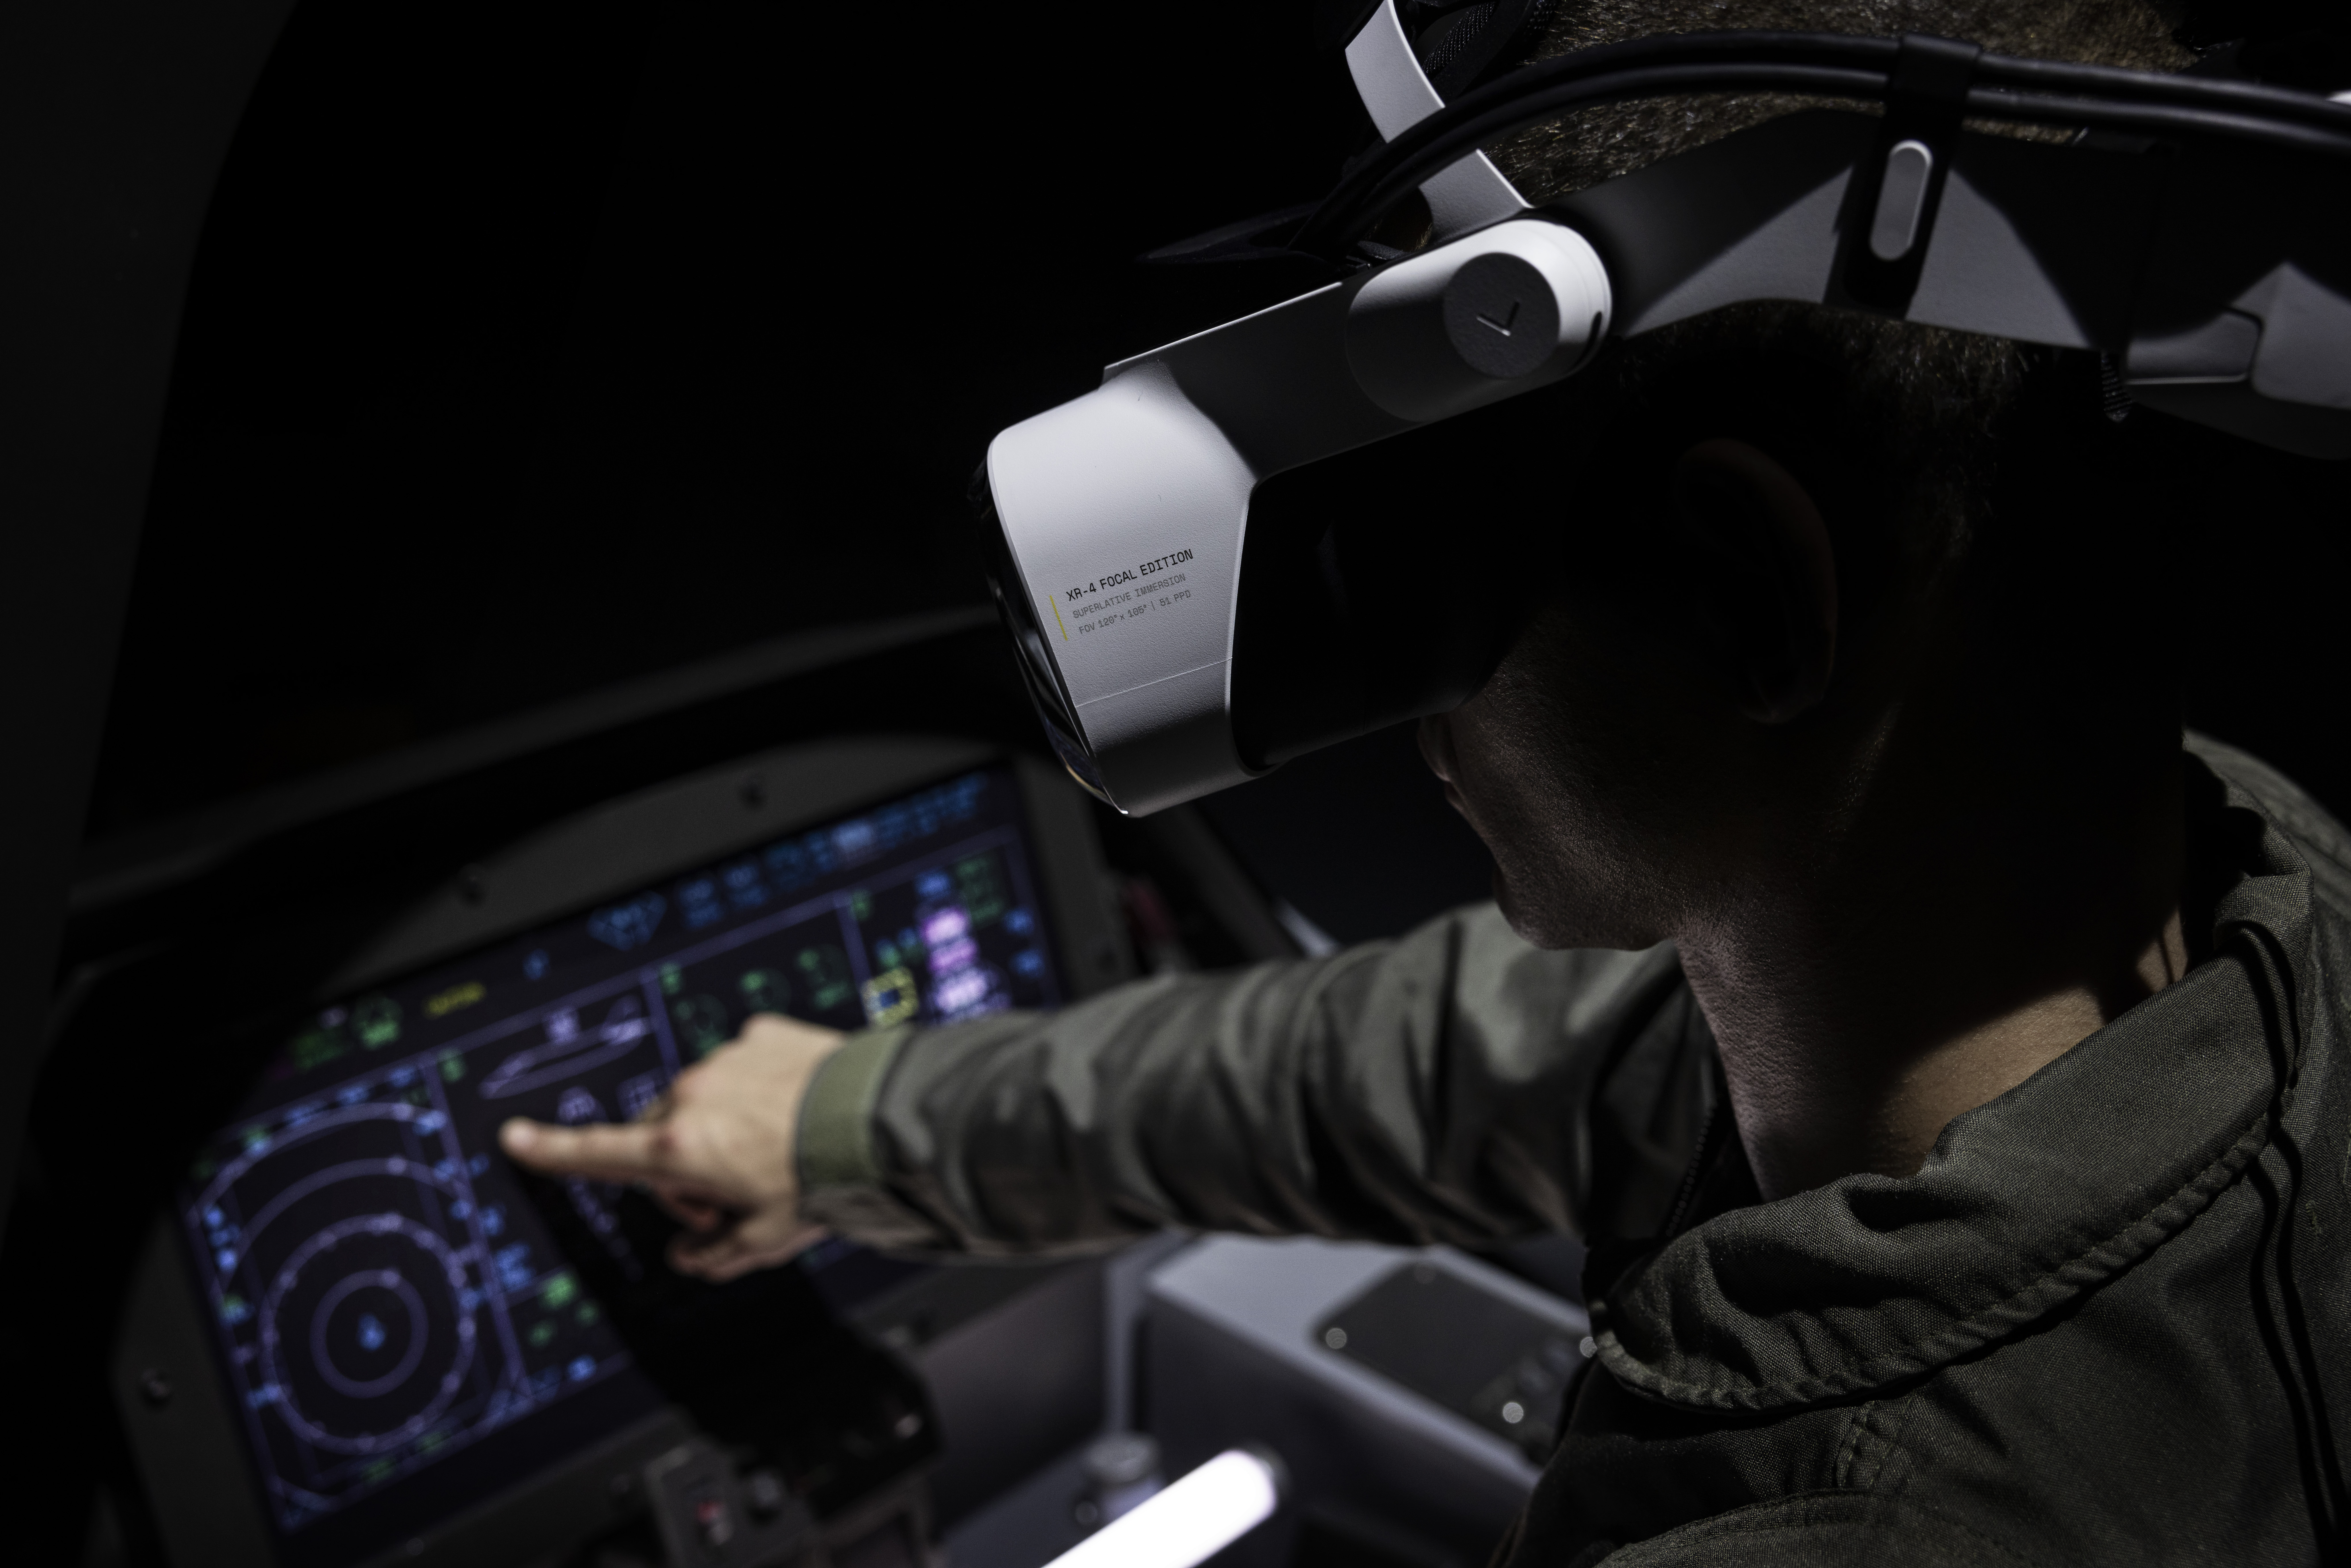 A pilot in training inside of a cockpit wearing a Varjo XR-4 Focal Edition headset, which is white and bulky on his head, the pilot has a hand reaching out towards some controls in the cockpit, which glow under an outstretched fingertip.